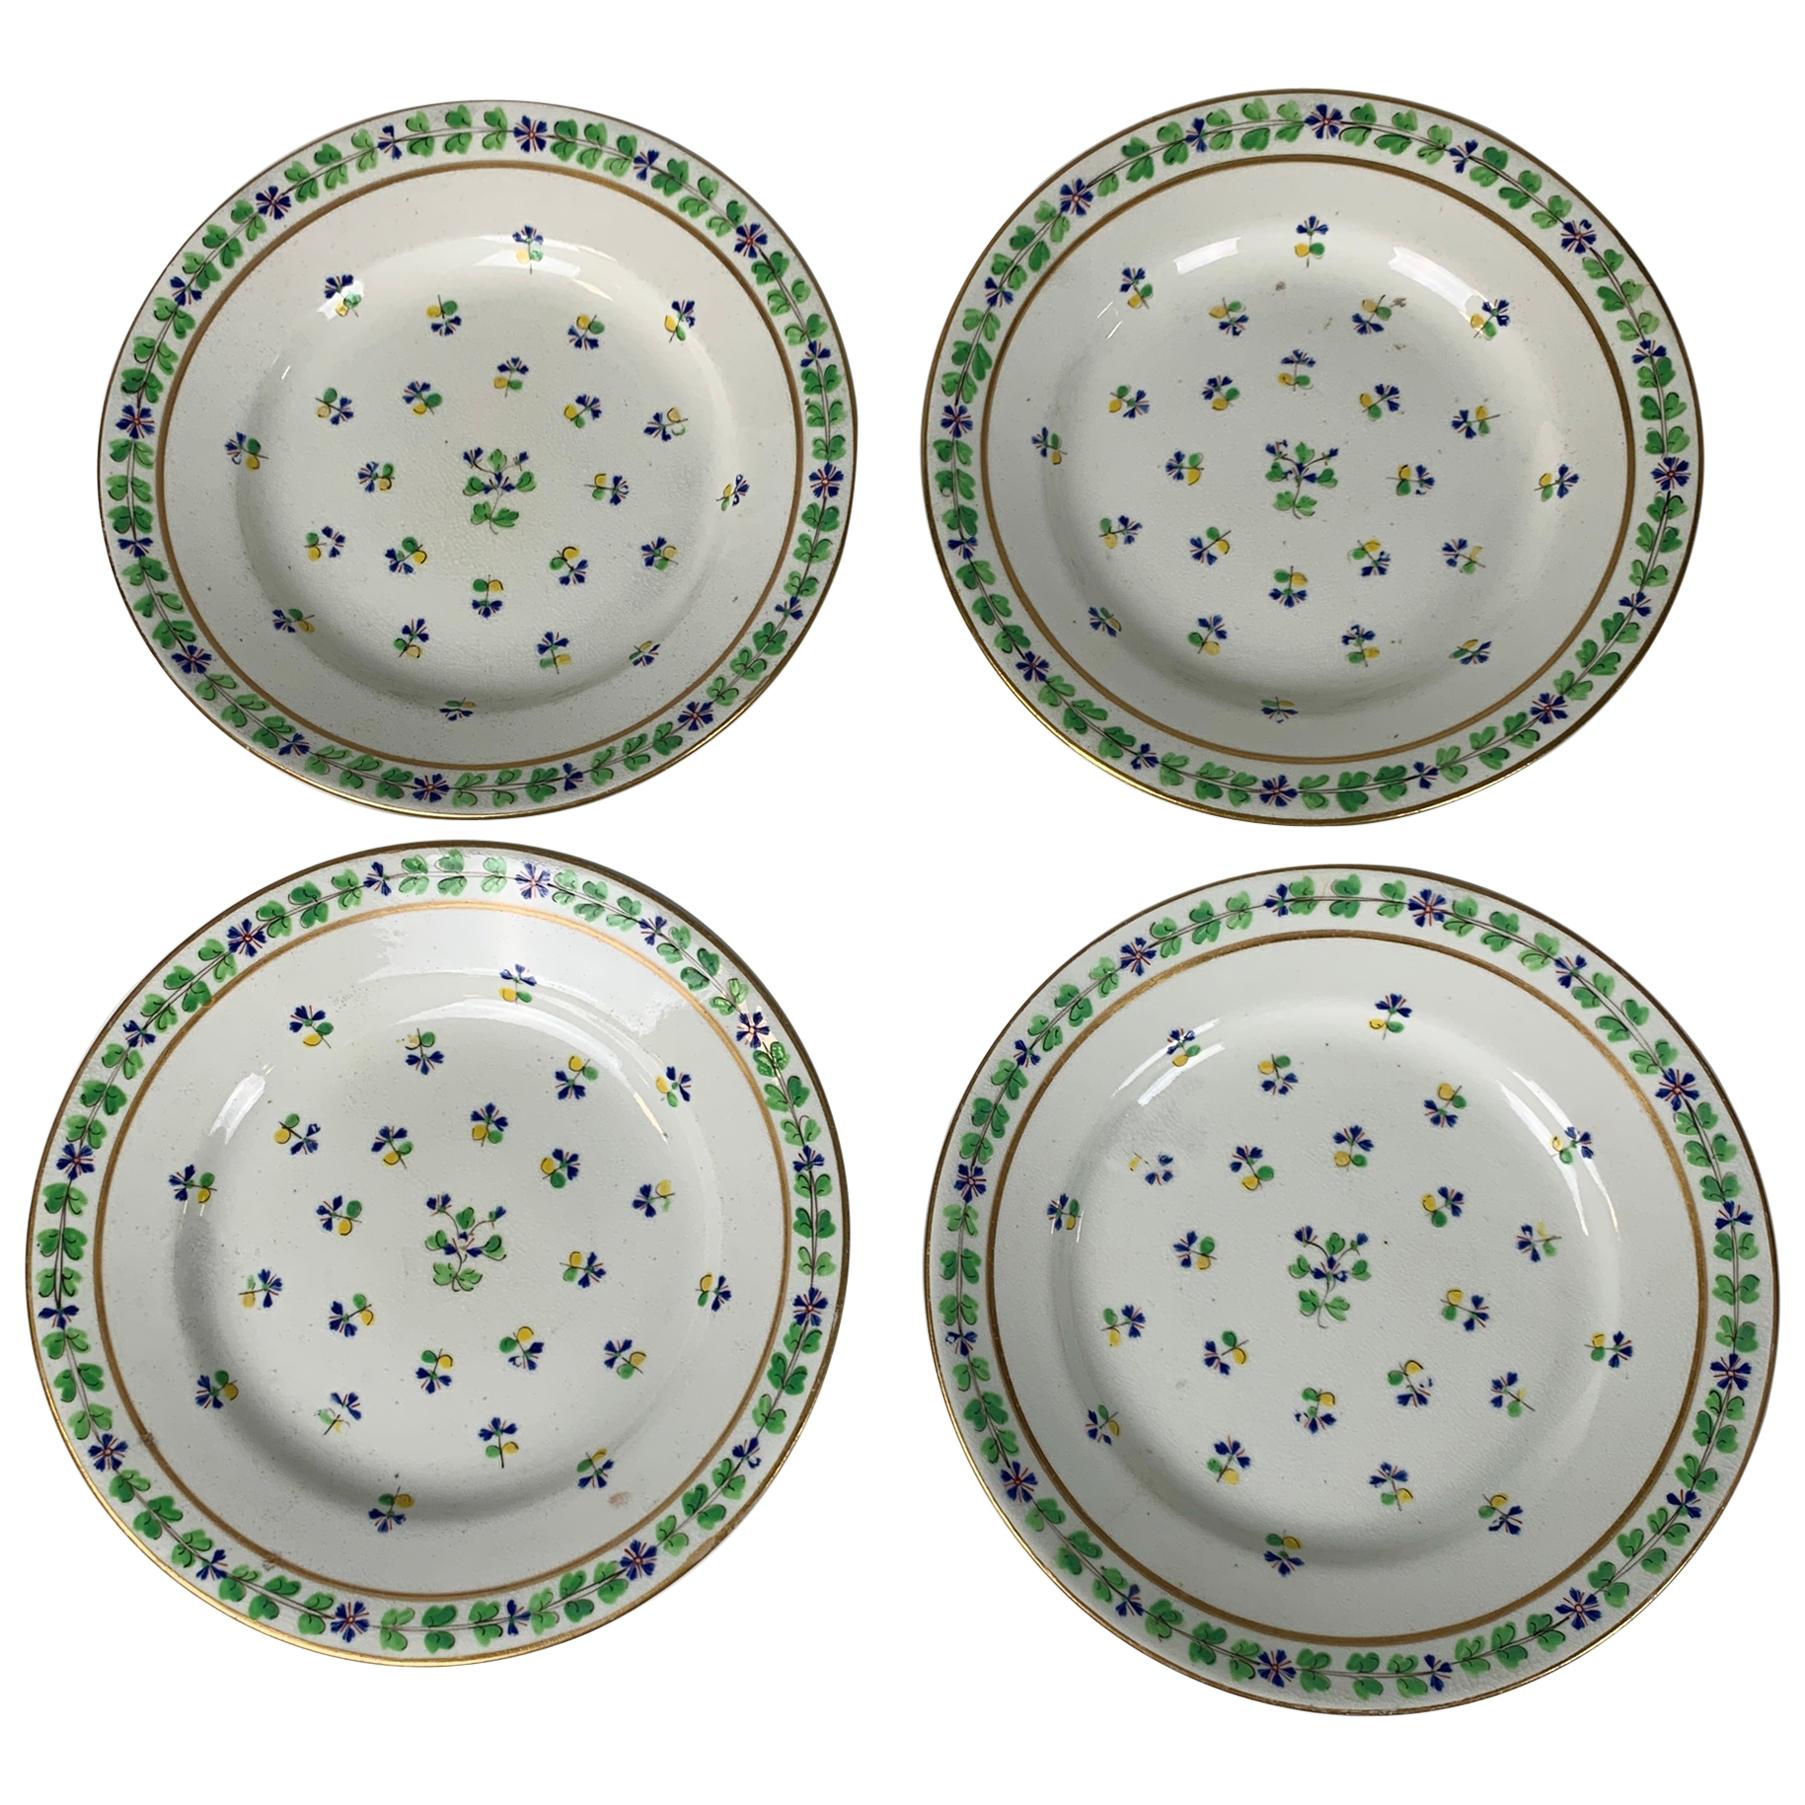 Four Derby Porcelain Dishes Hand Painted in Sprig Pattern, England, circa 1815